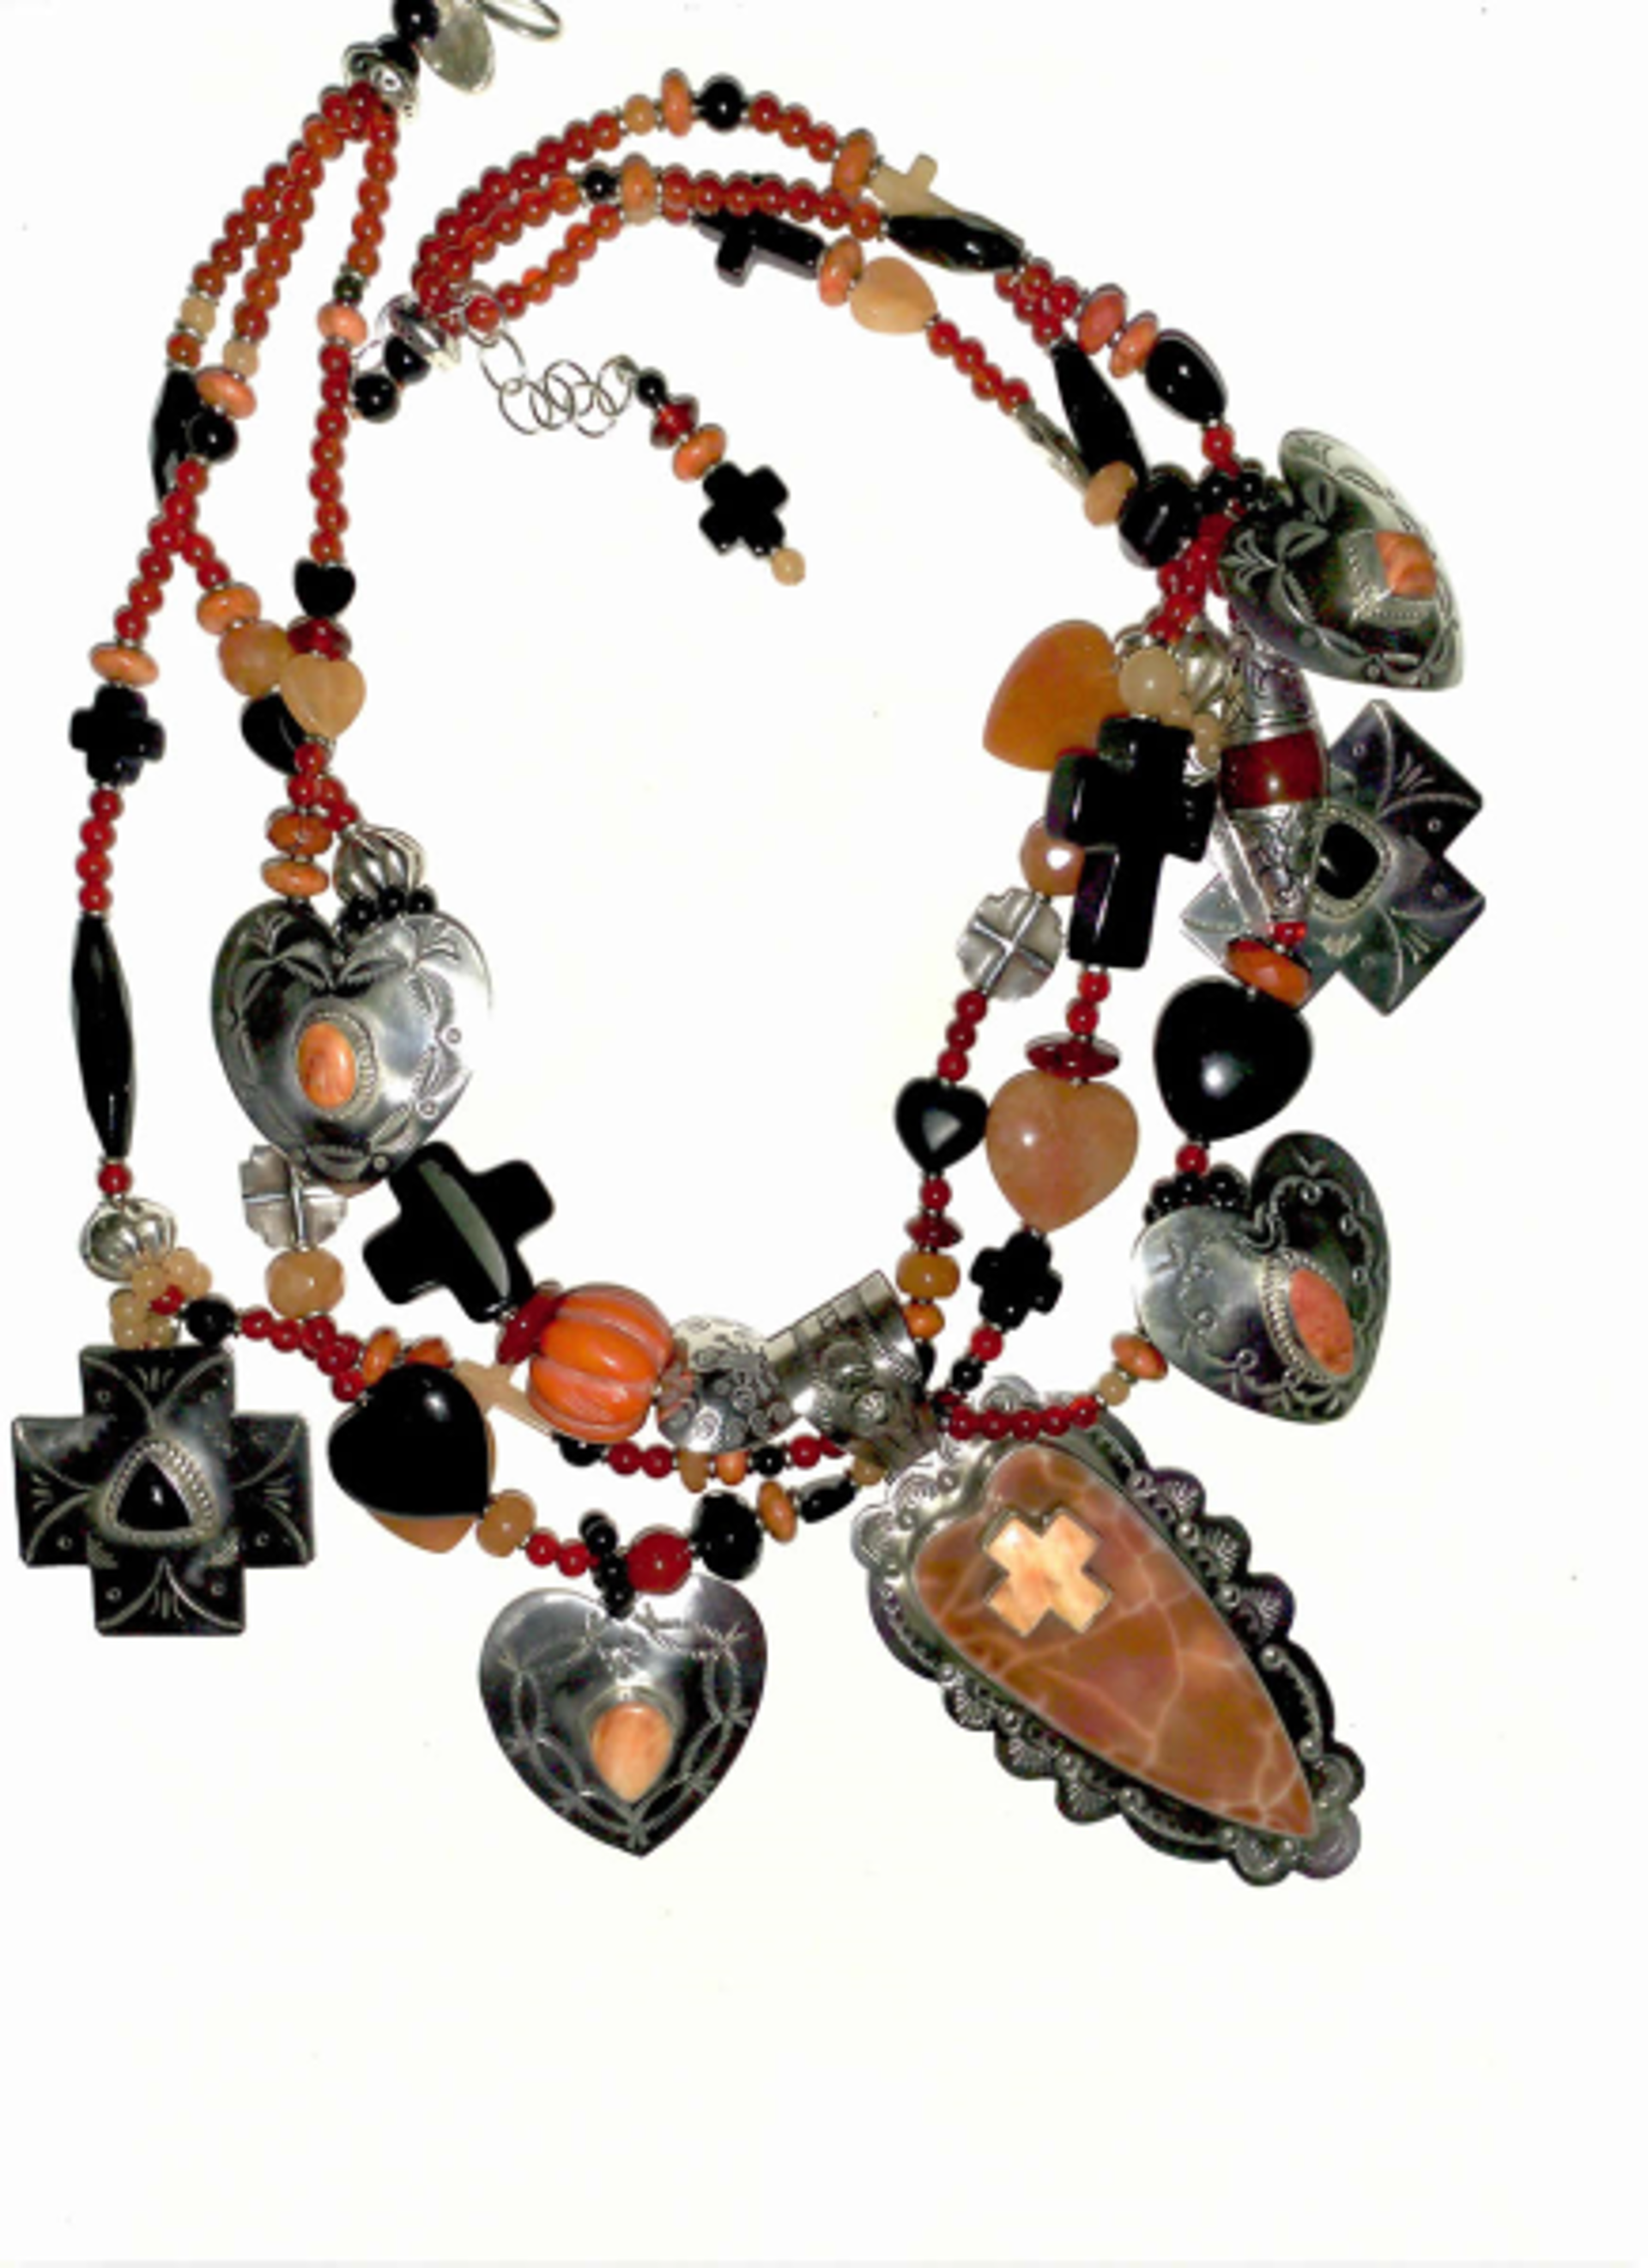 KY 3 - Carnelian, Onyx and Coral Hearts and Crosses Necklace by Kim Yubeta